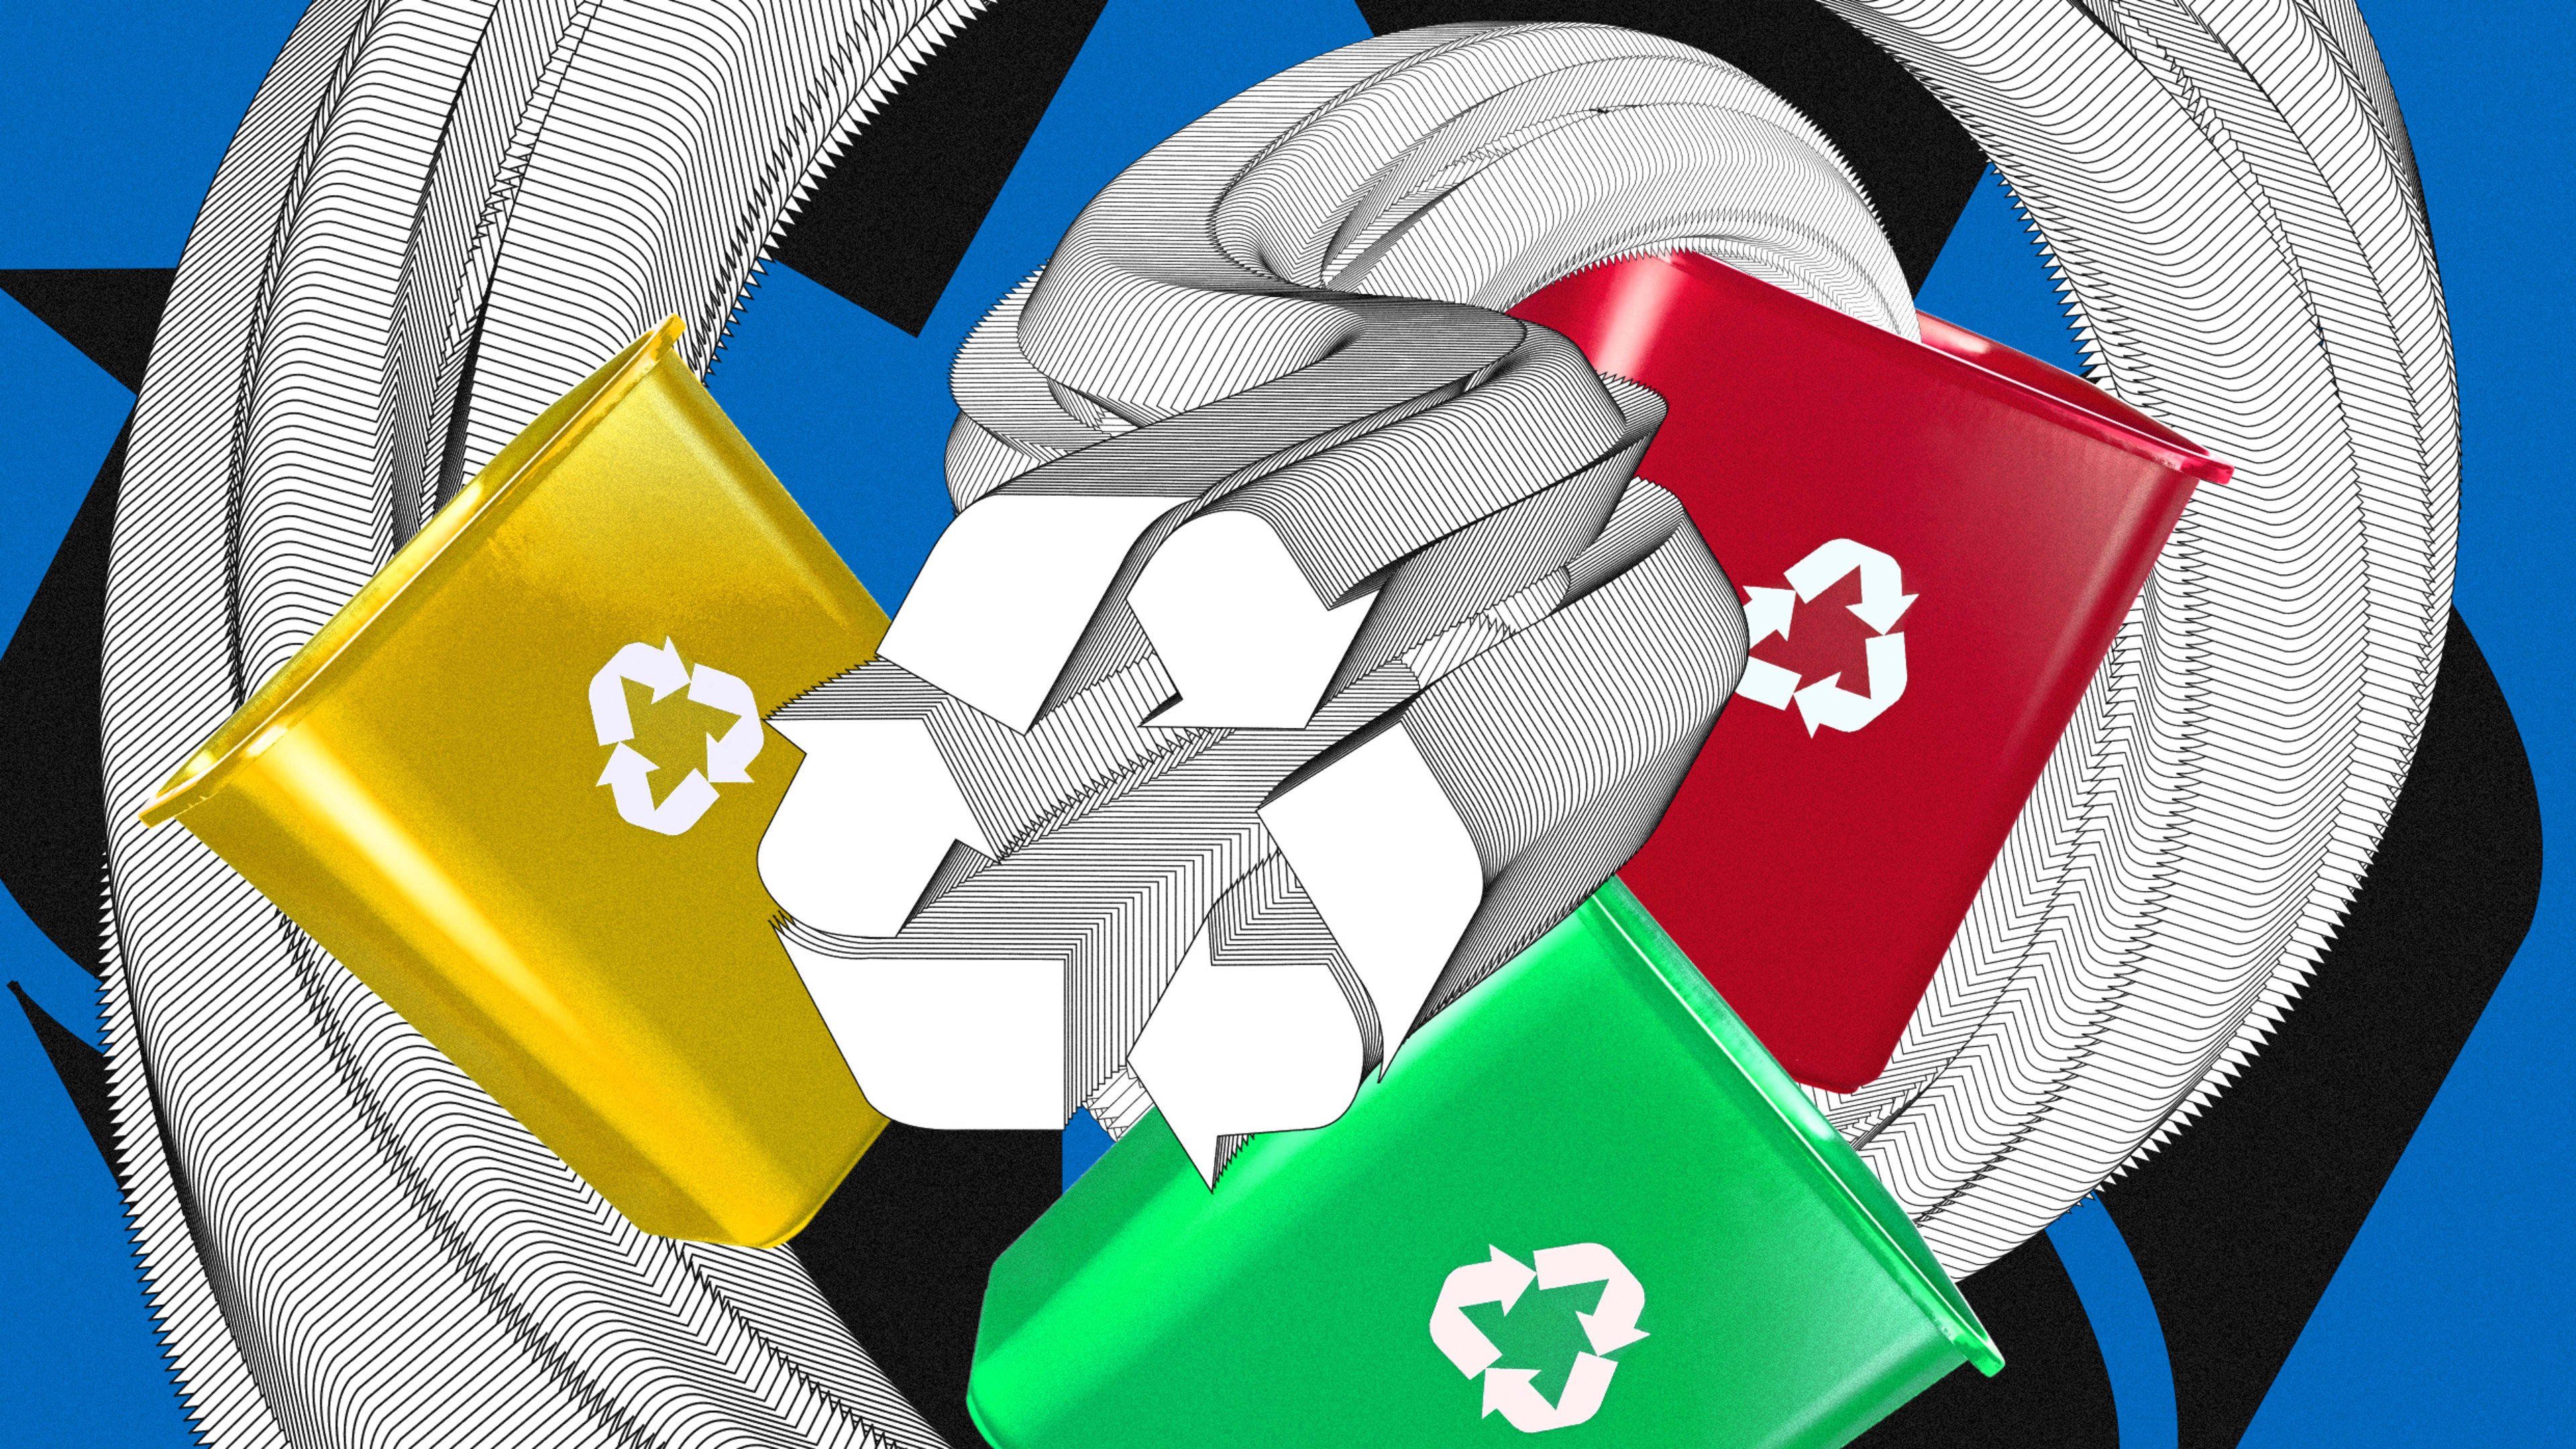 Waste is an enormous problem. But recycling is the wrong solution